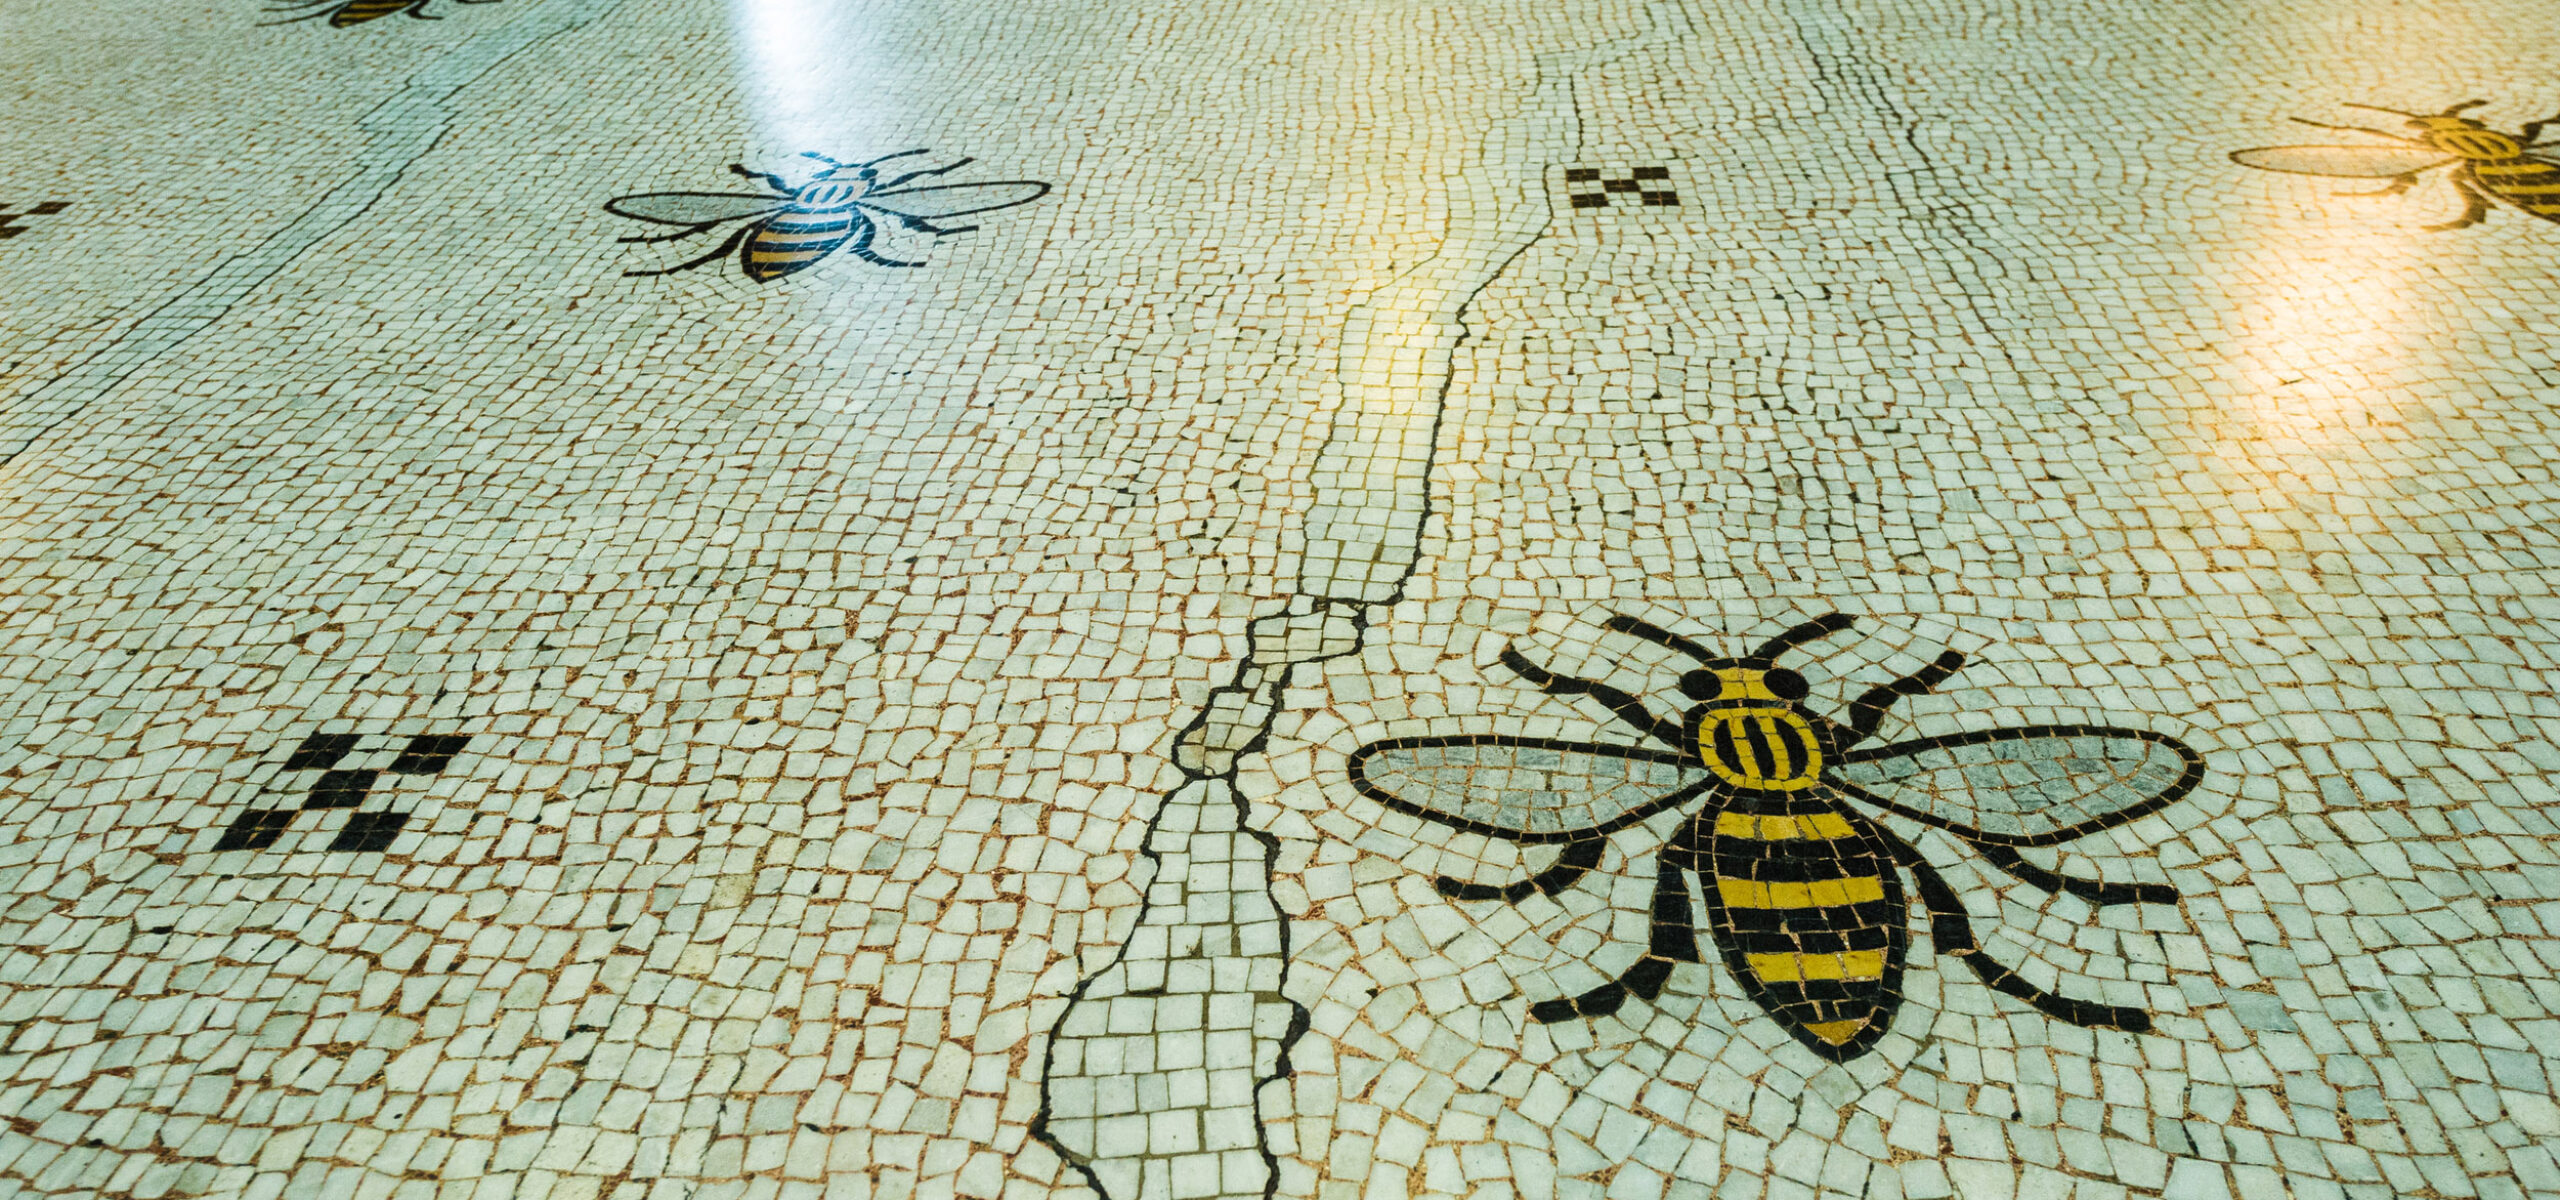 The Manchester Bee